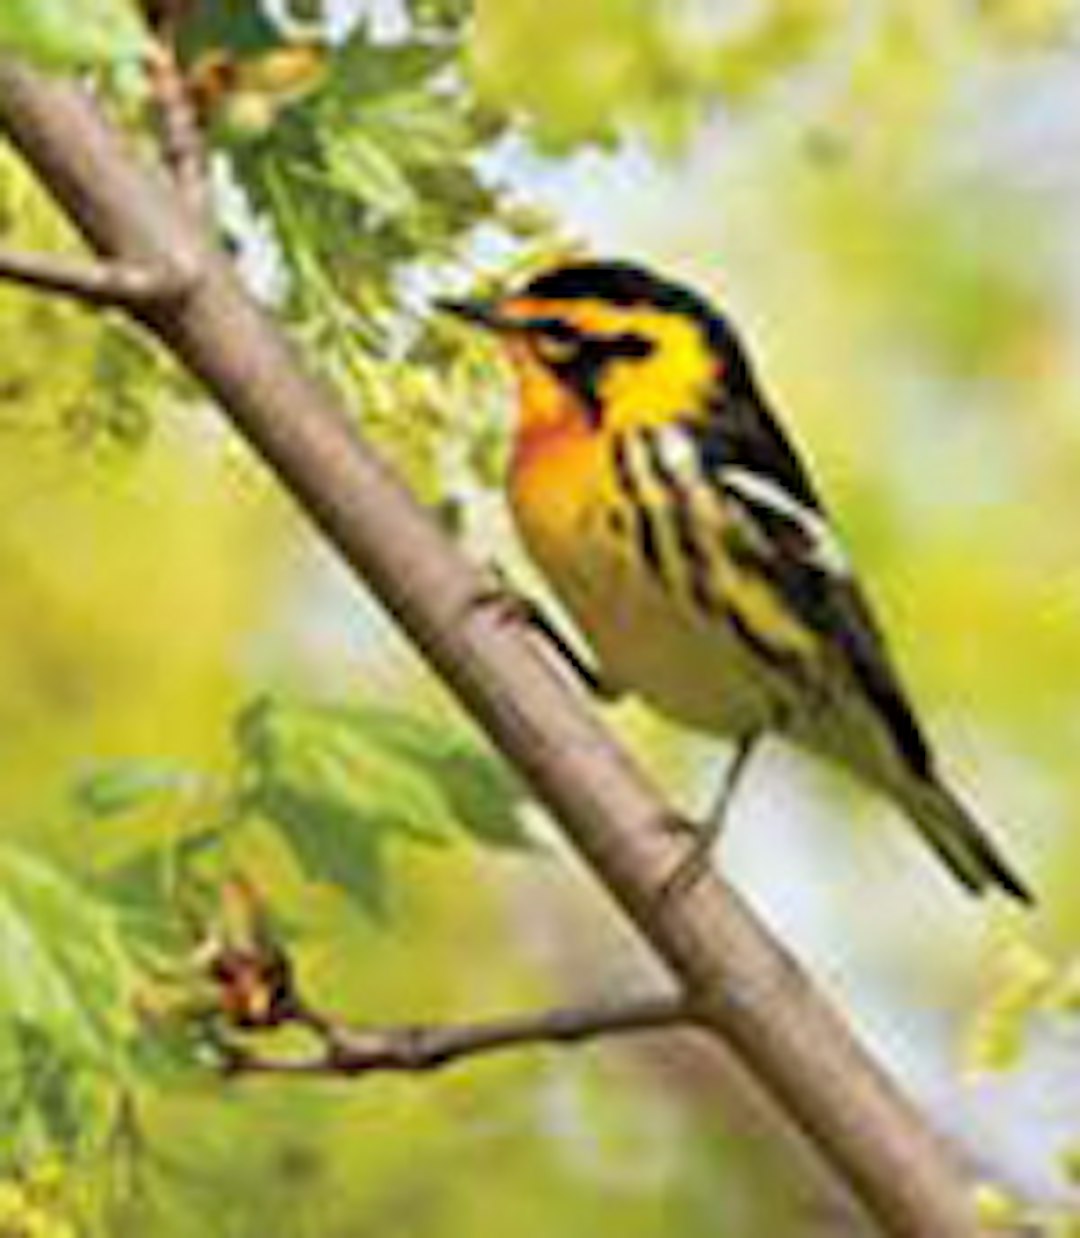 A colorful blackburnian warbler perched on a branch amidst green foliage.